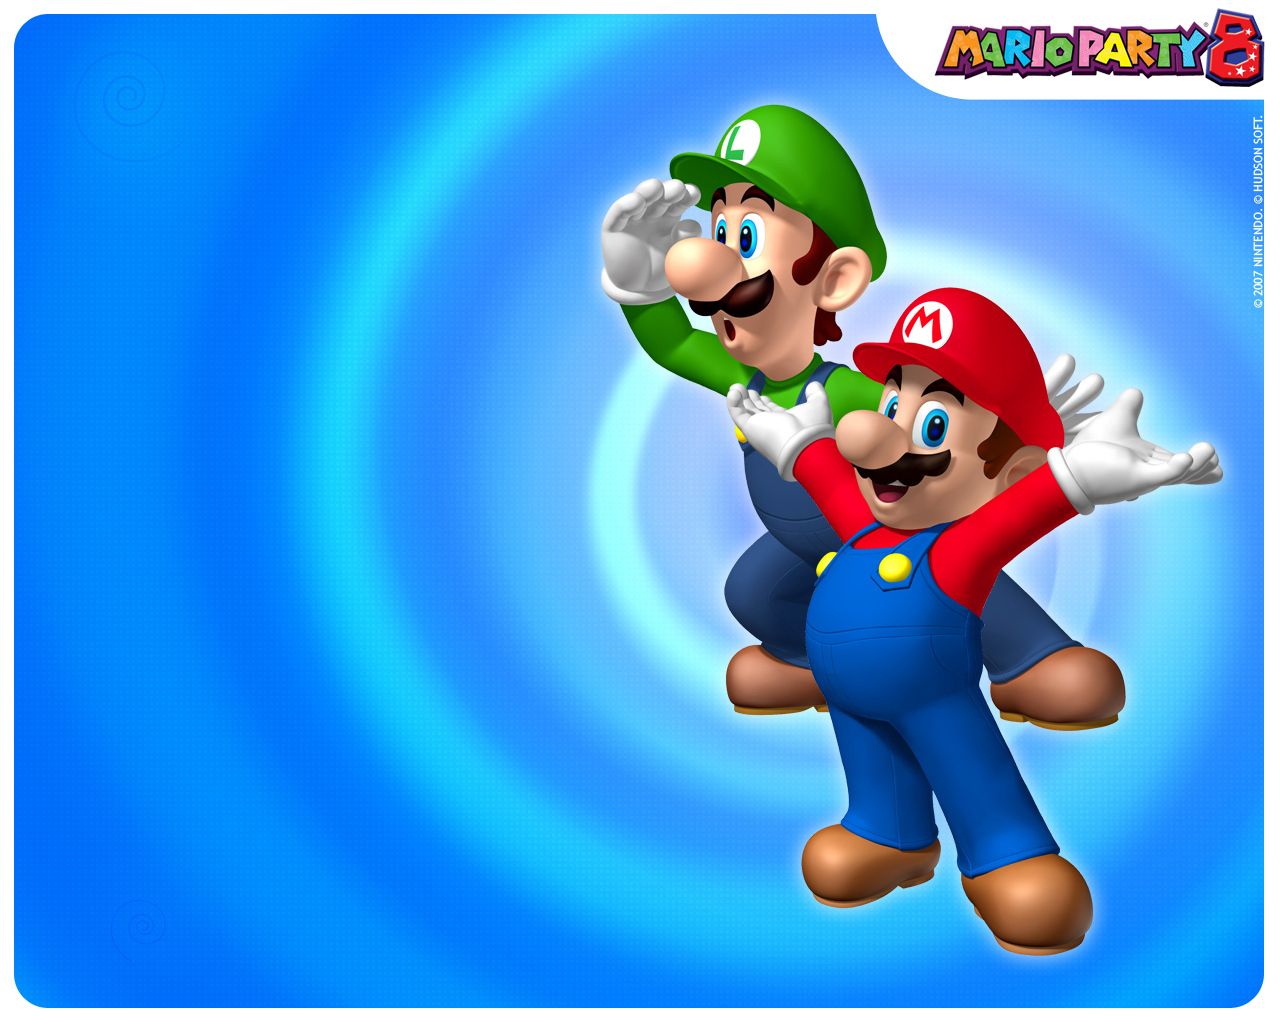 Mario Party 8 Wallpaper. Mario Party Wallpaper, Party Wallpaper and Christmas Party Background